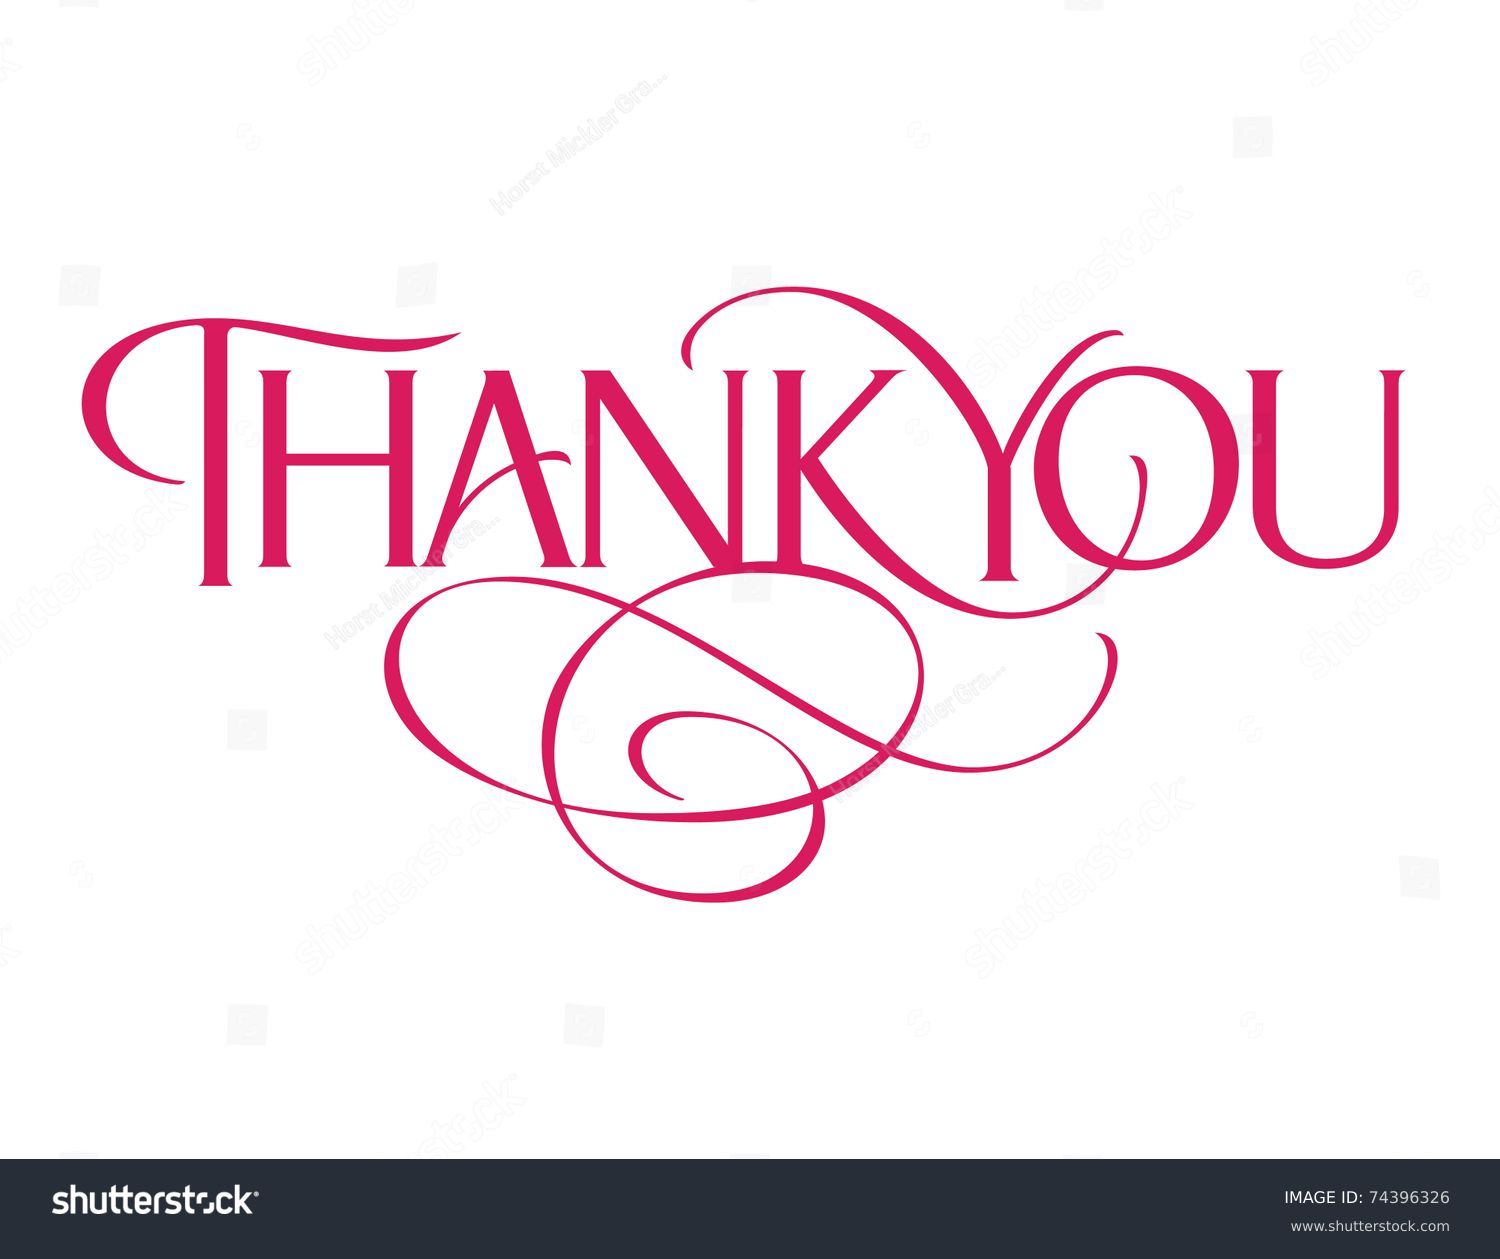 vector free download thank you - photo #23